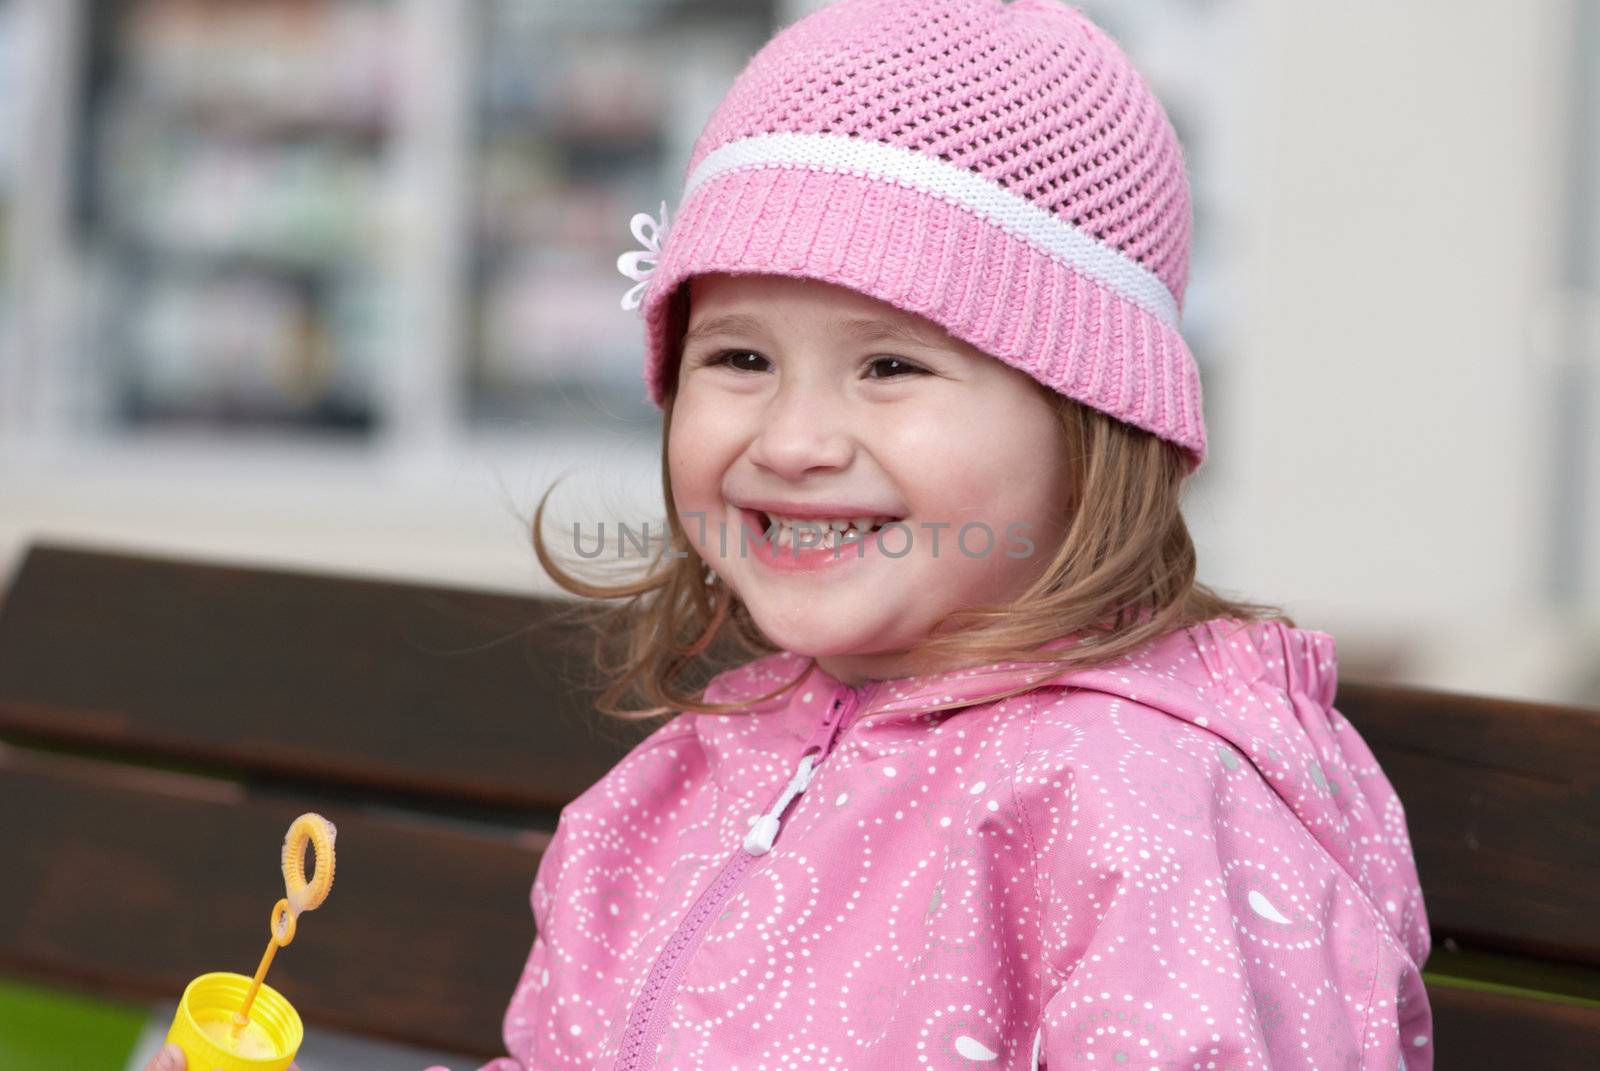 Smiling girl with a bubble wand on a branch